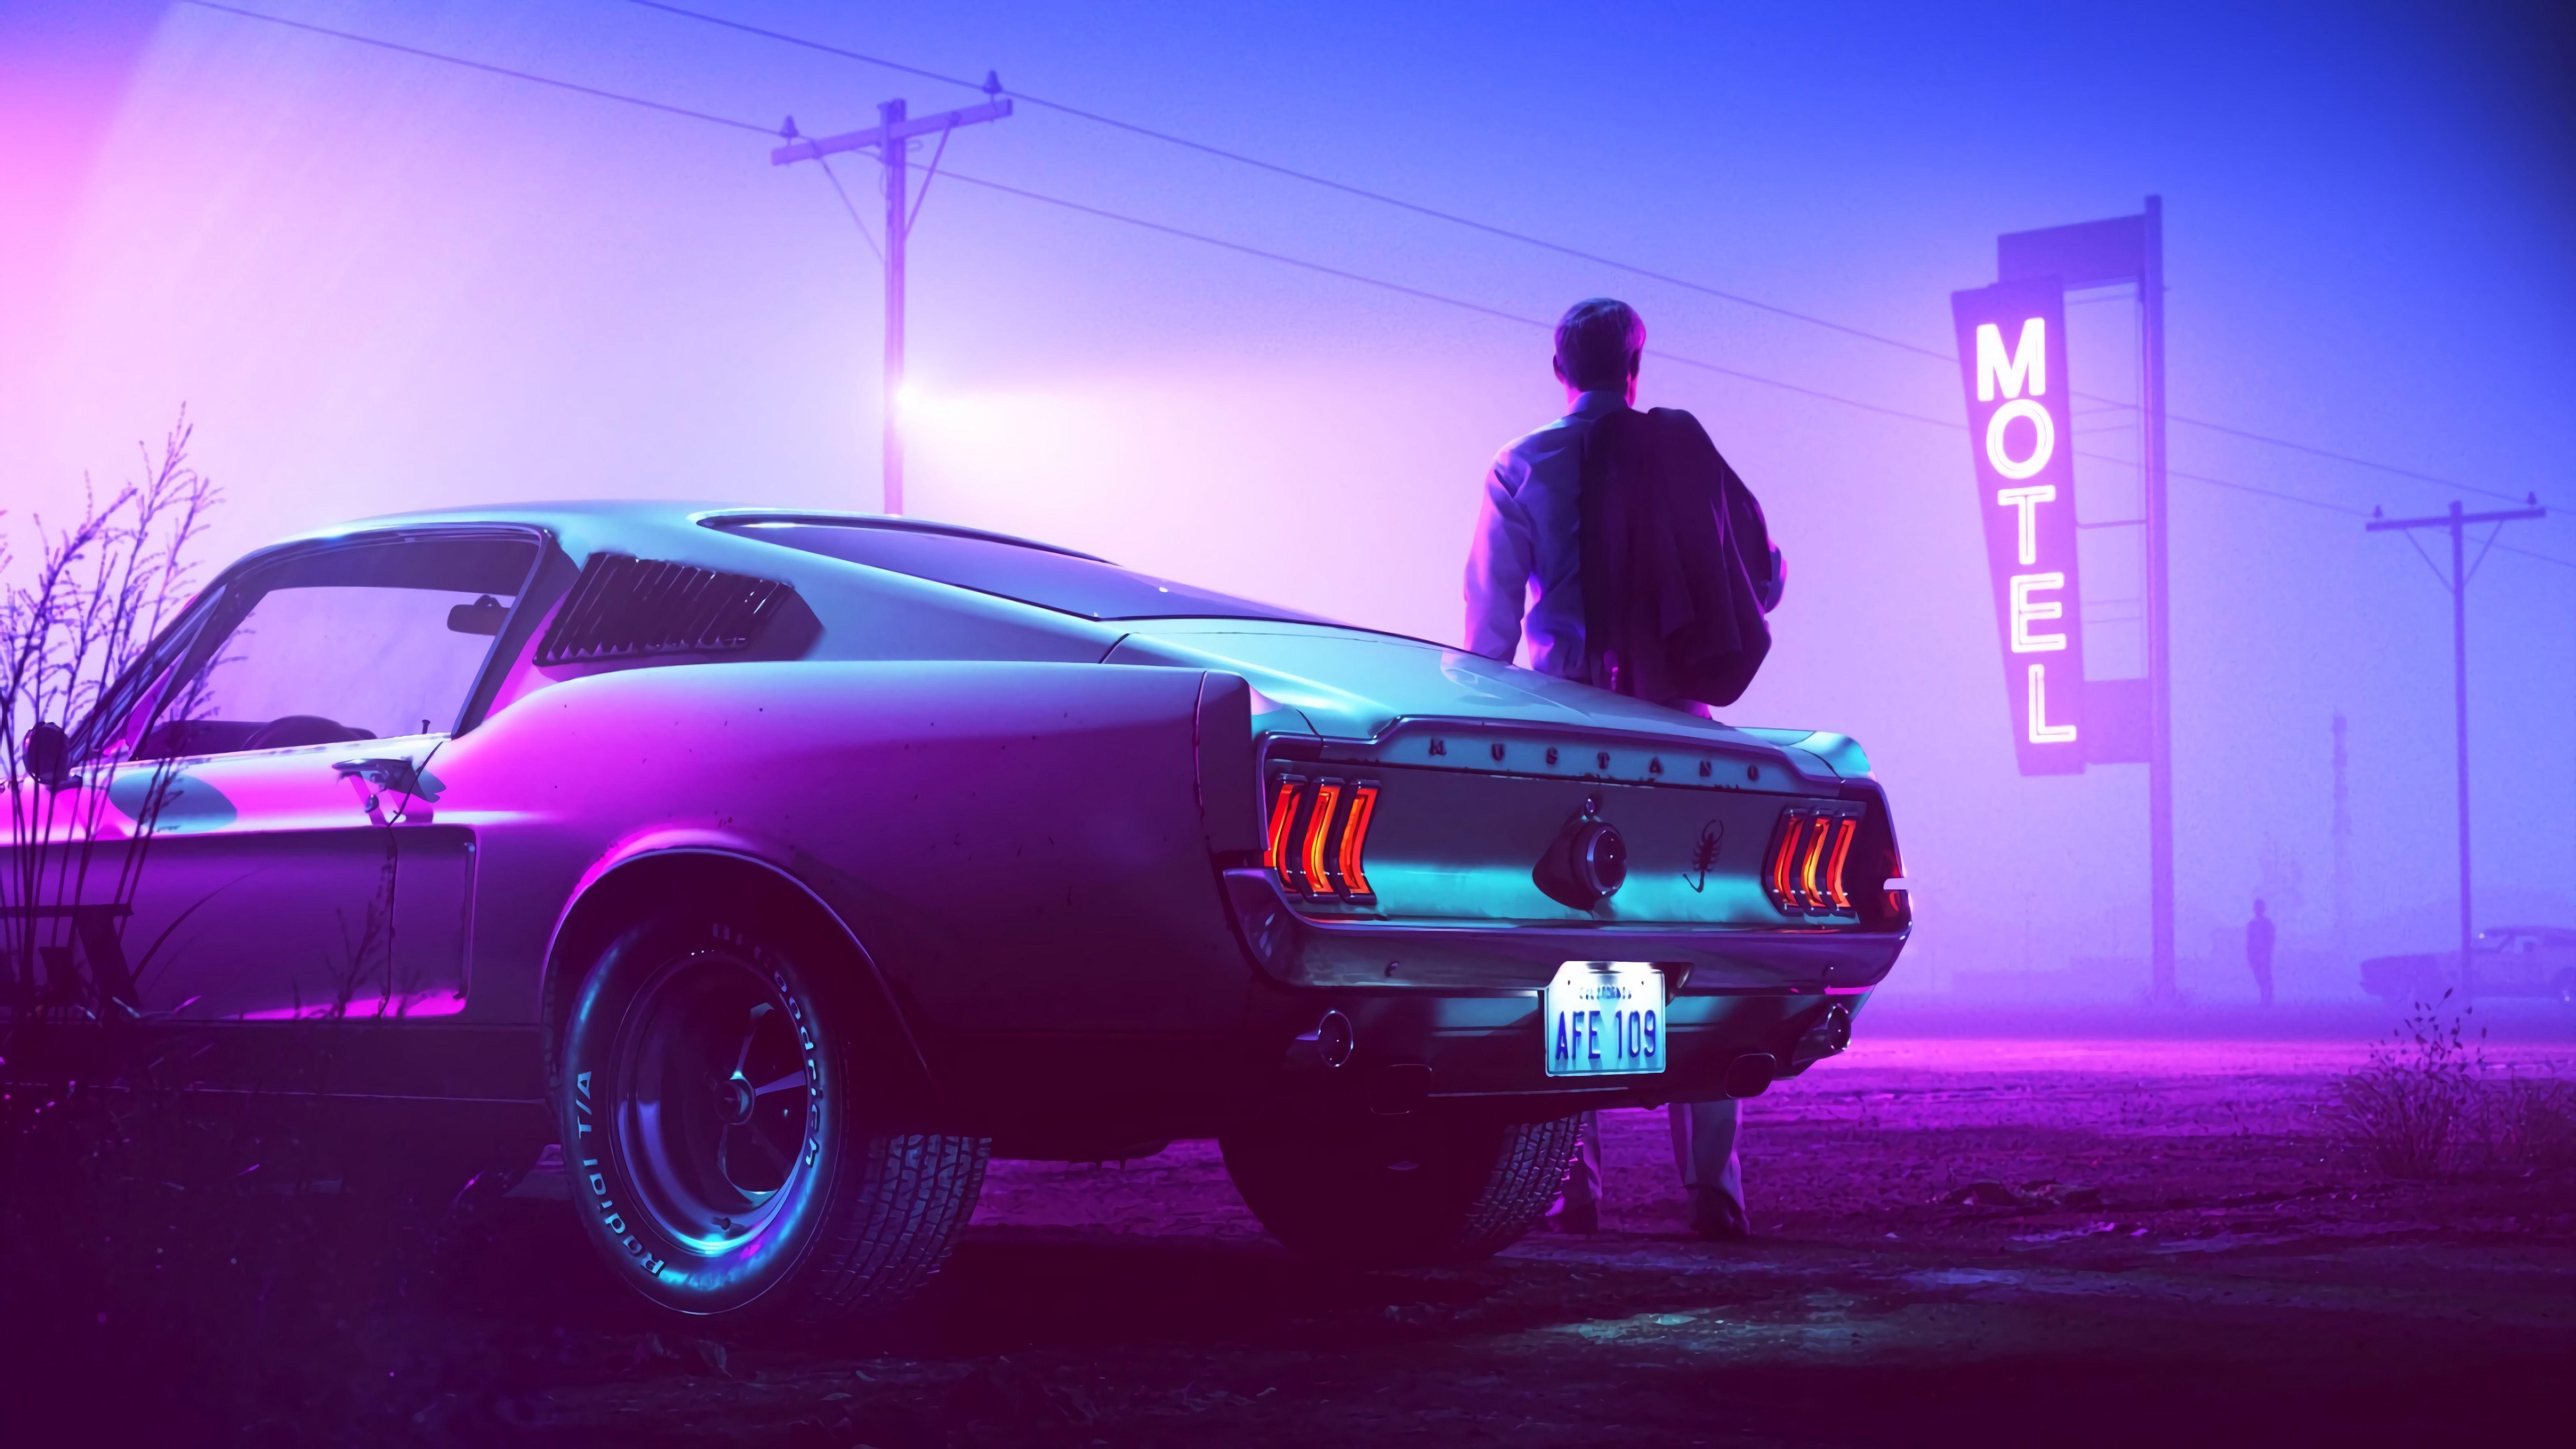 A man standing next to a car in a purple neon motel. - Cars